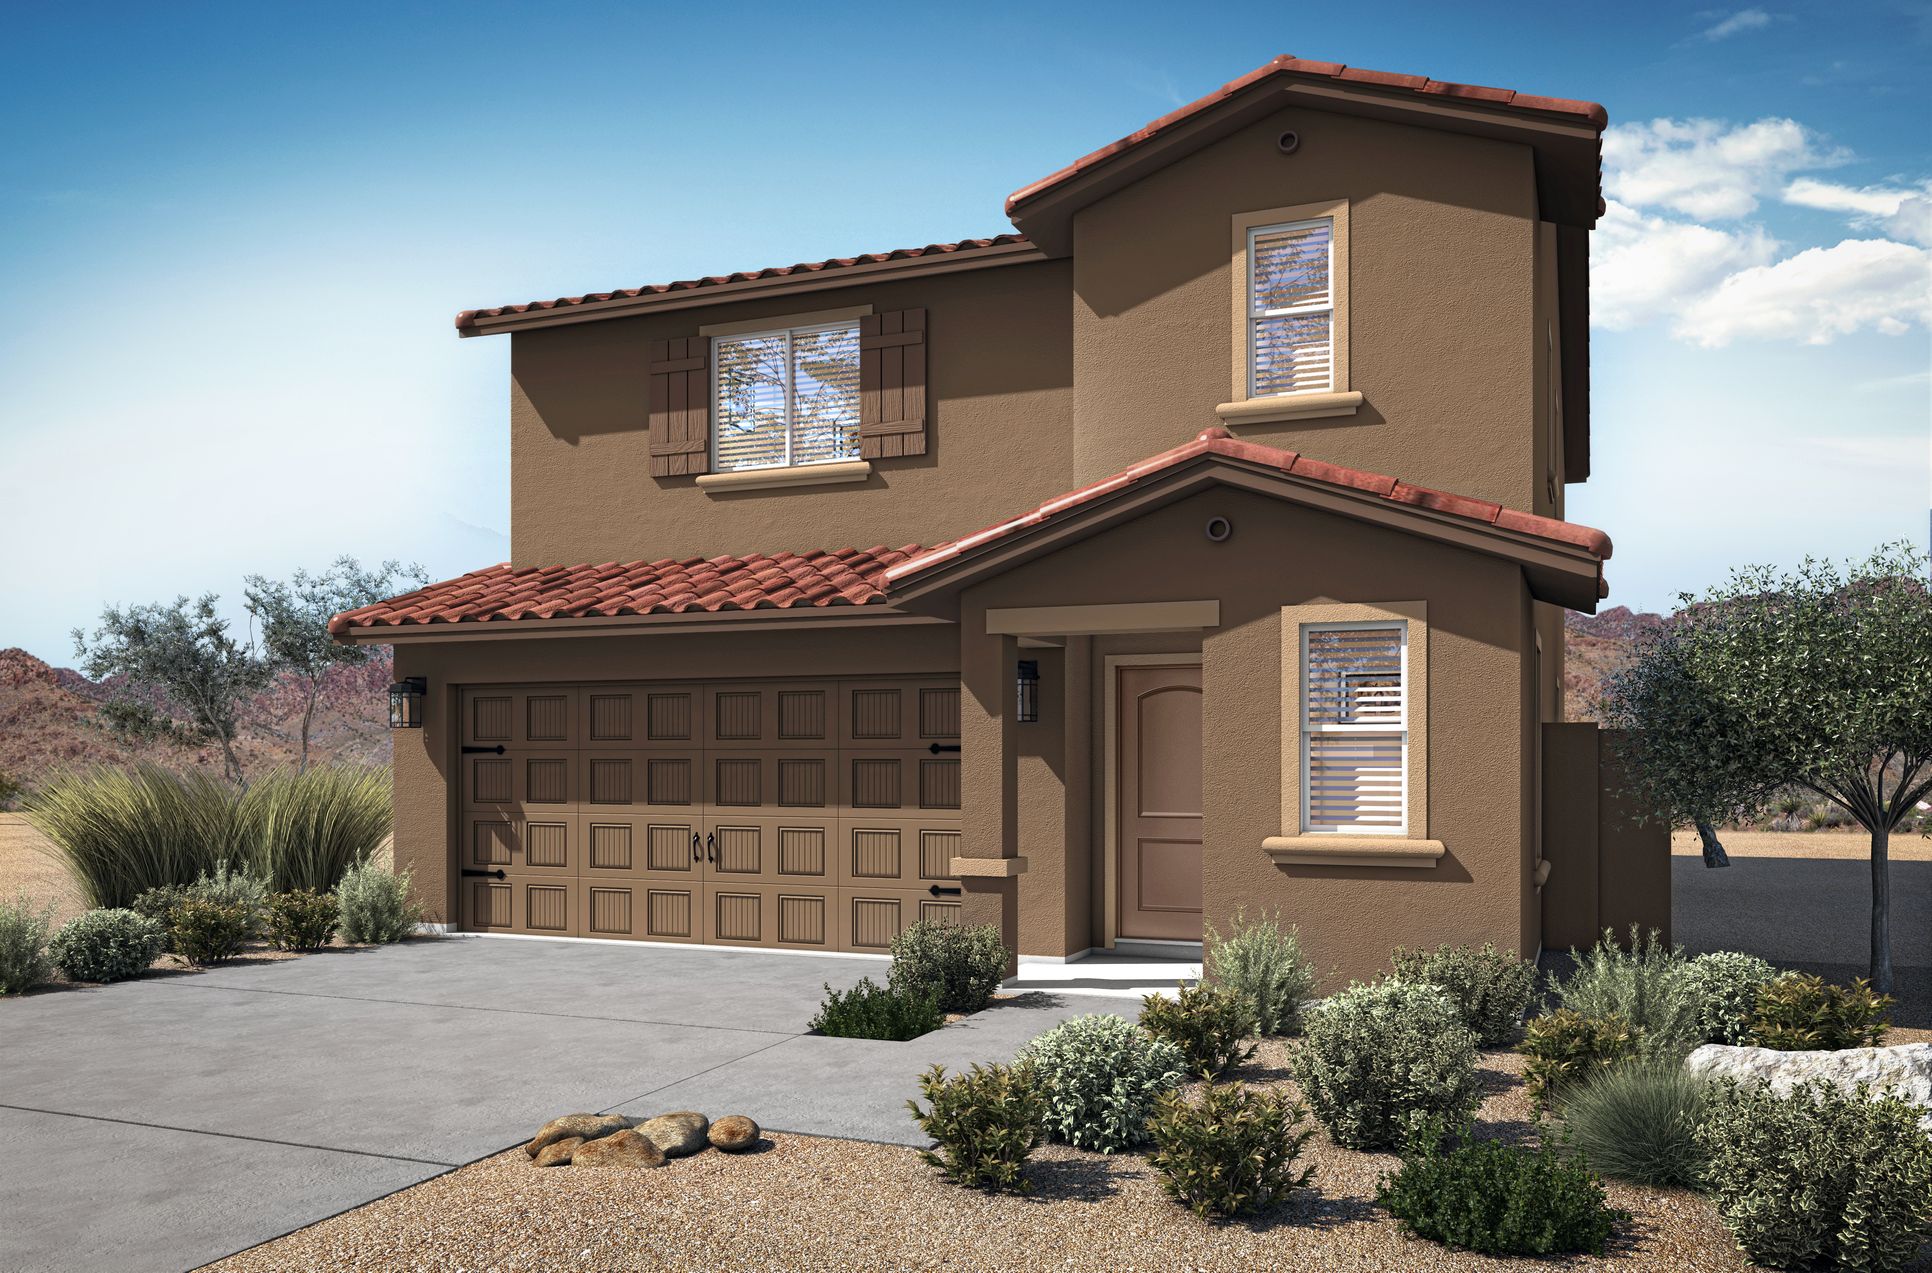 The Mesquite by LGI Homes